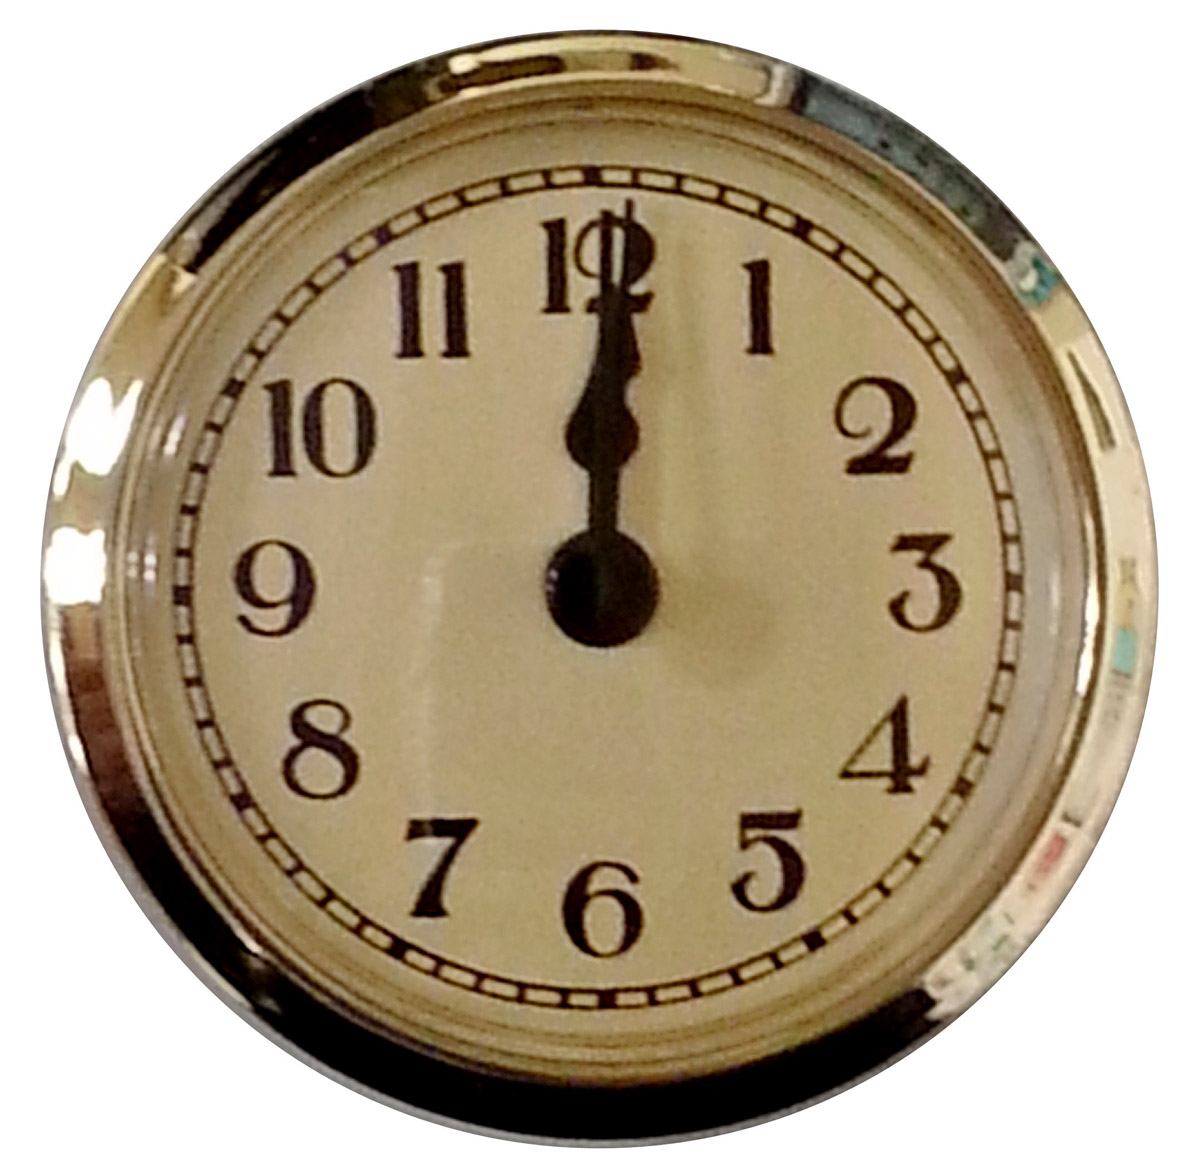 Clock Insert in Popular 1-7/16 Size Has an Easy-to-Read Arabic Dial and Glass Crystal 